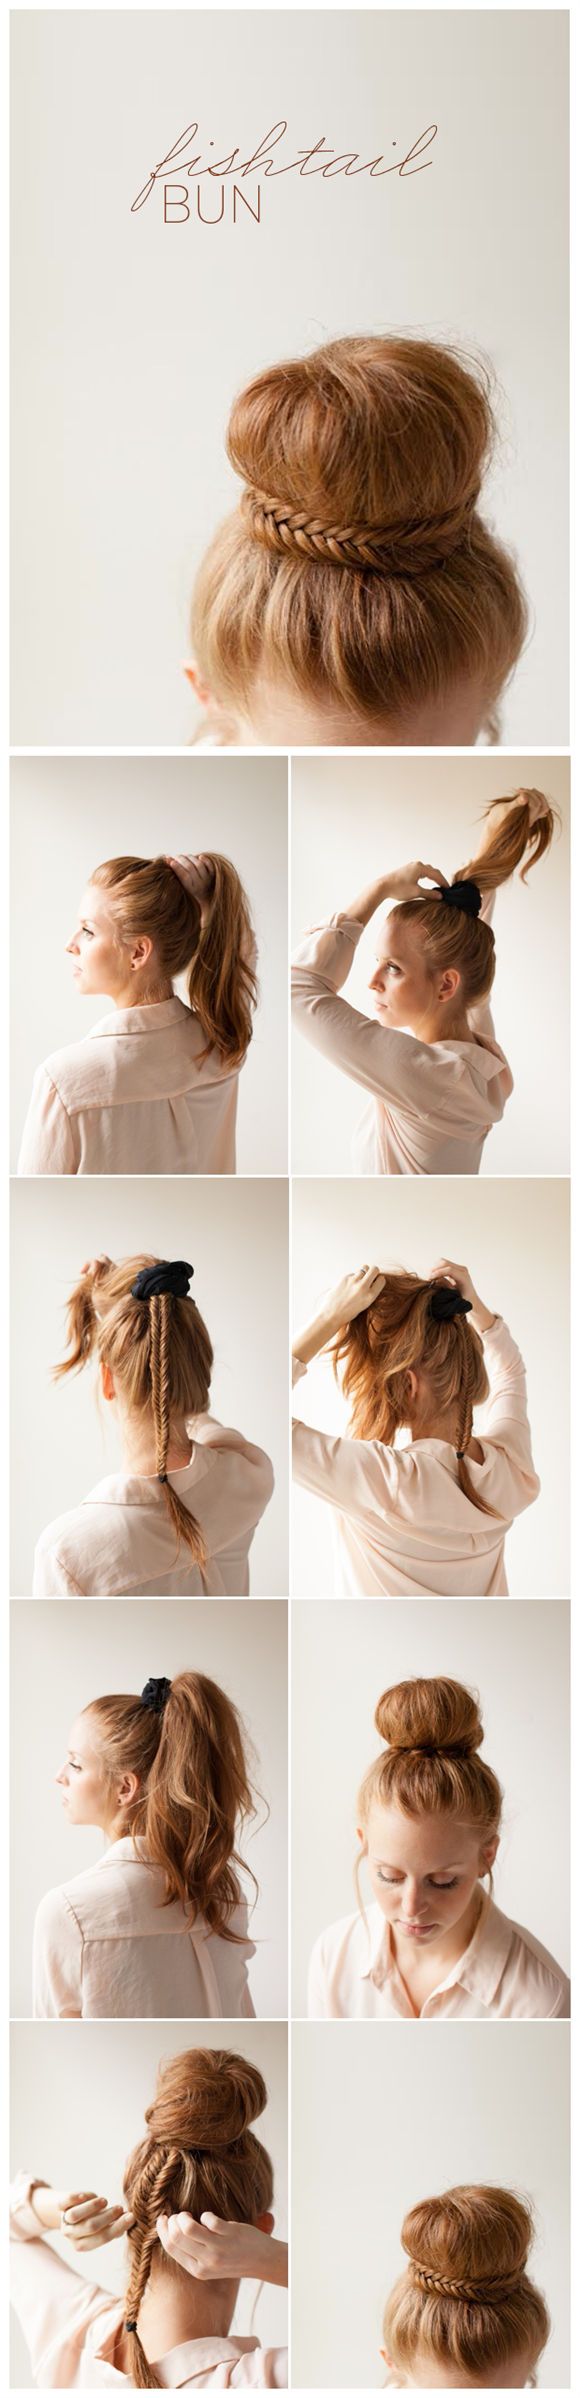 4 Cute Hairstyles for Spring! Check the Hair Tutorials Here